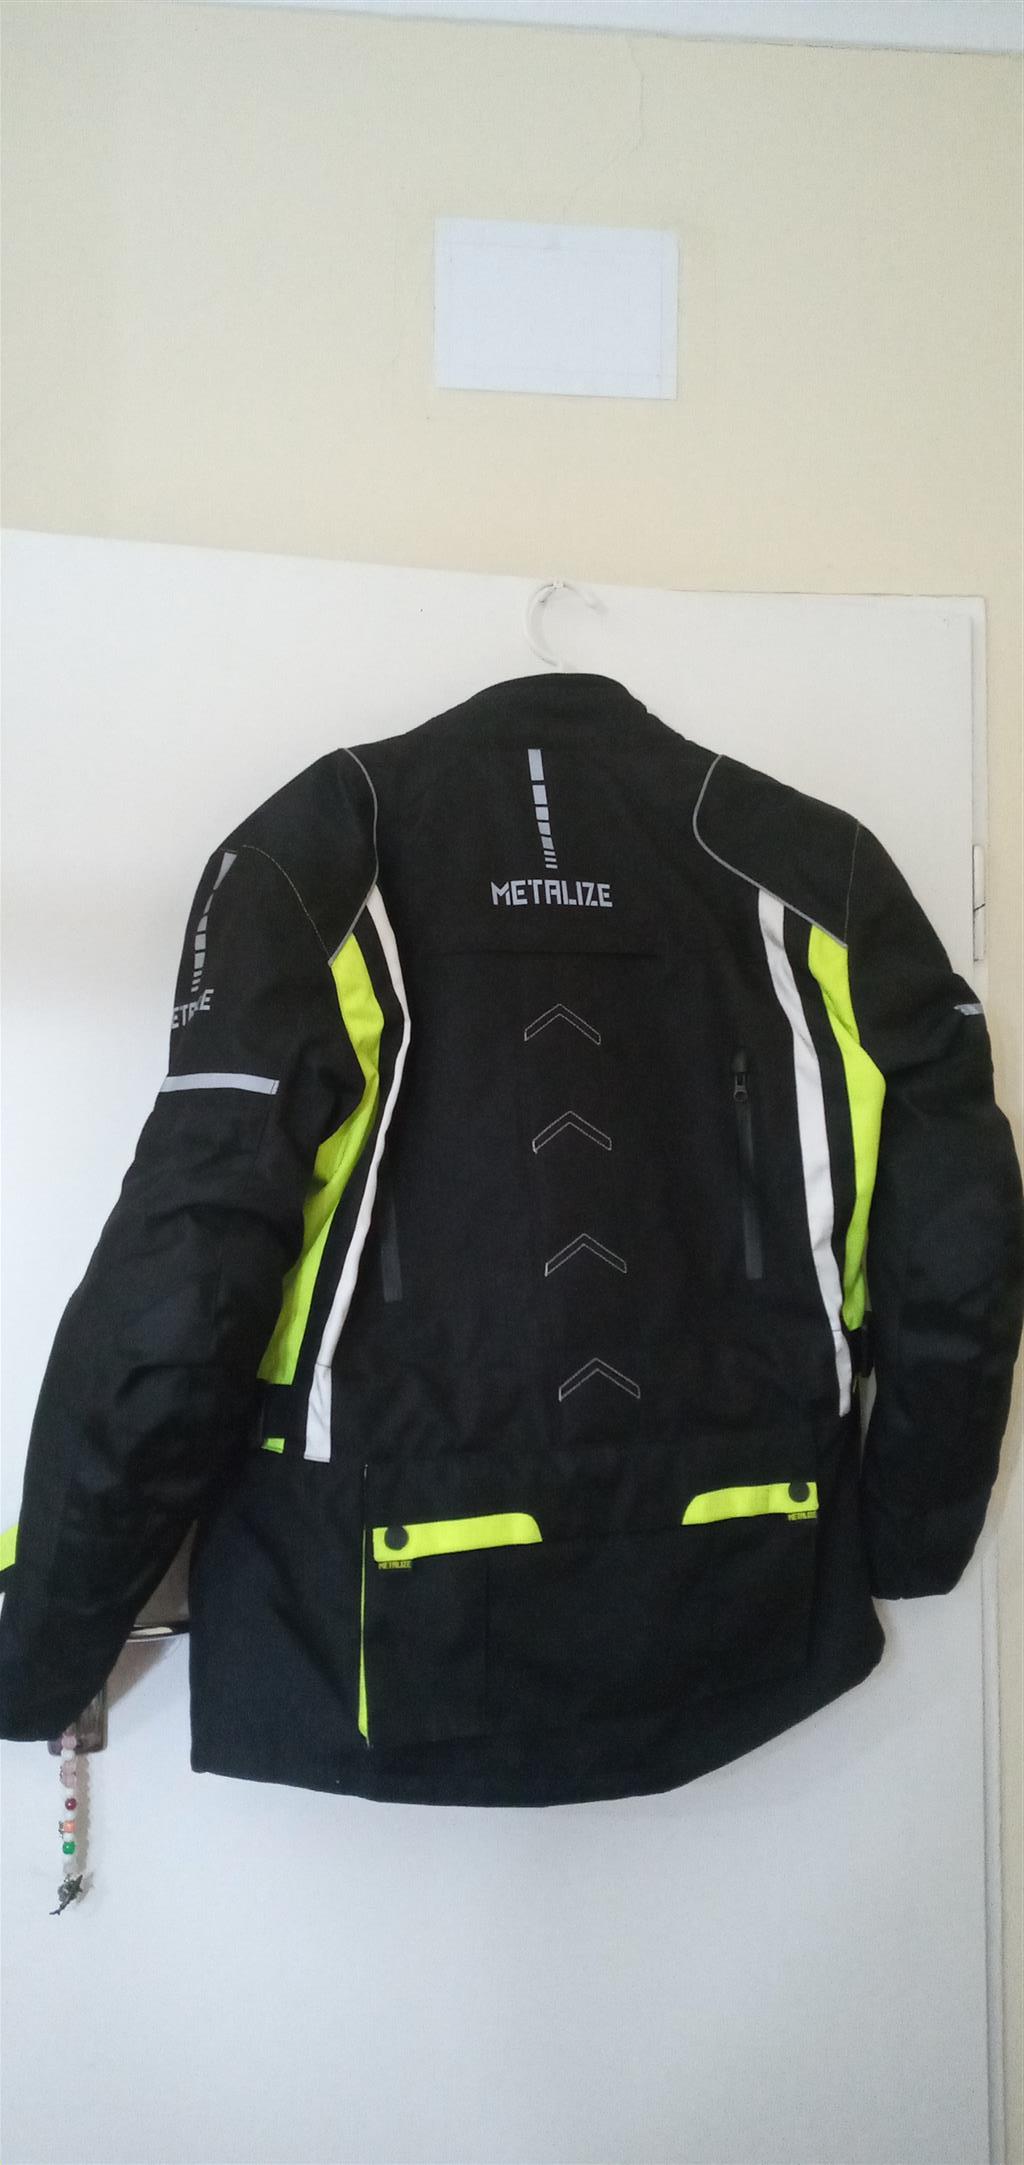 Motorcycle Gear Clothing